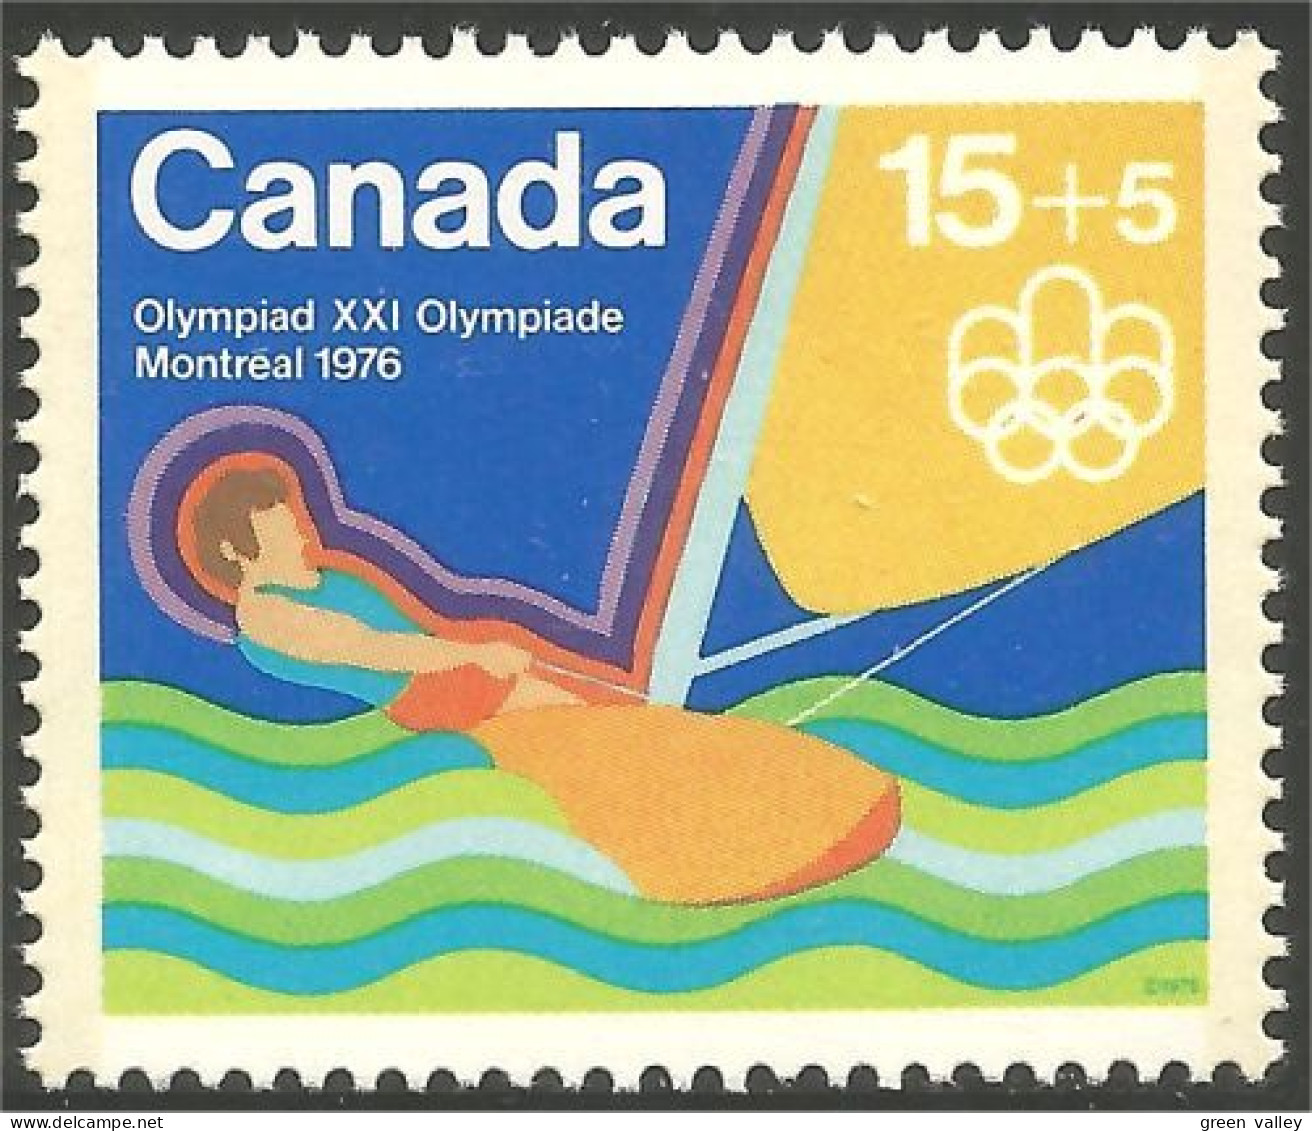 Canada 15c+5c Voile Sailing Jeux Olympiques Montreal 1976 Olympic Games MNH ** Neuf SC (CB-06c) - Sommer 1976: Montreal